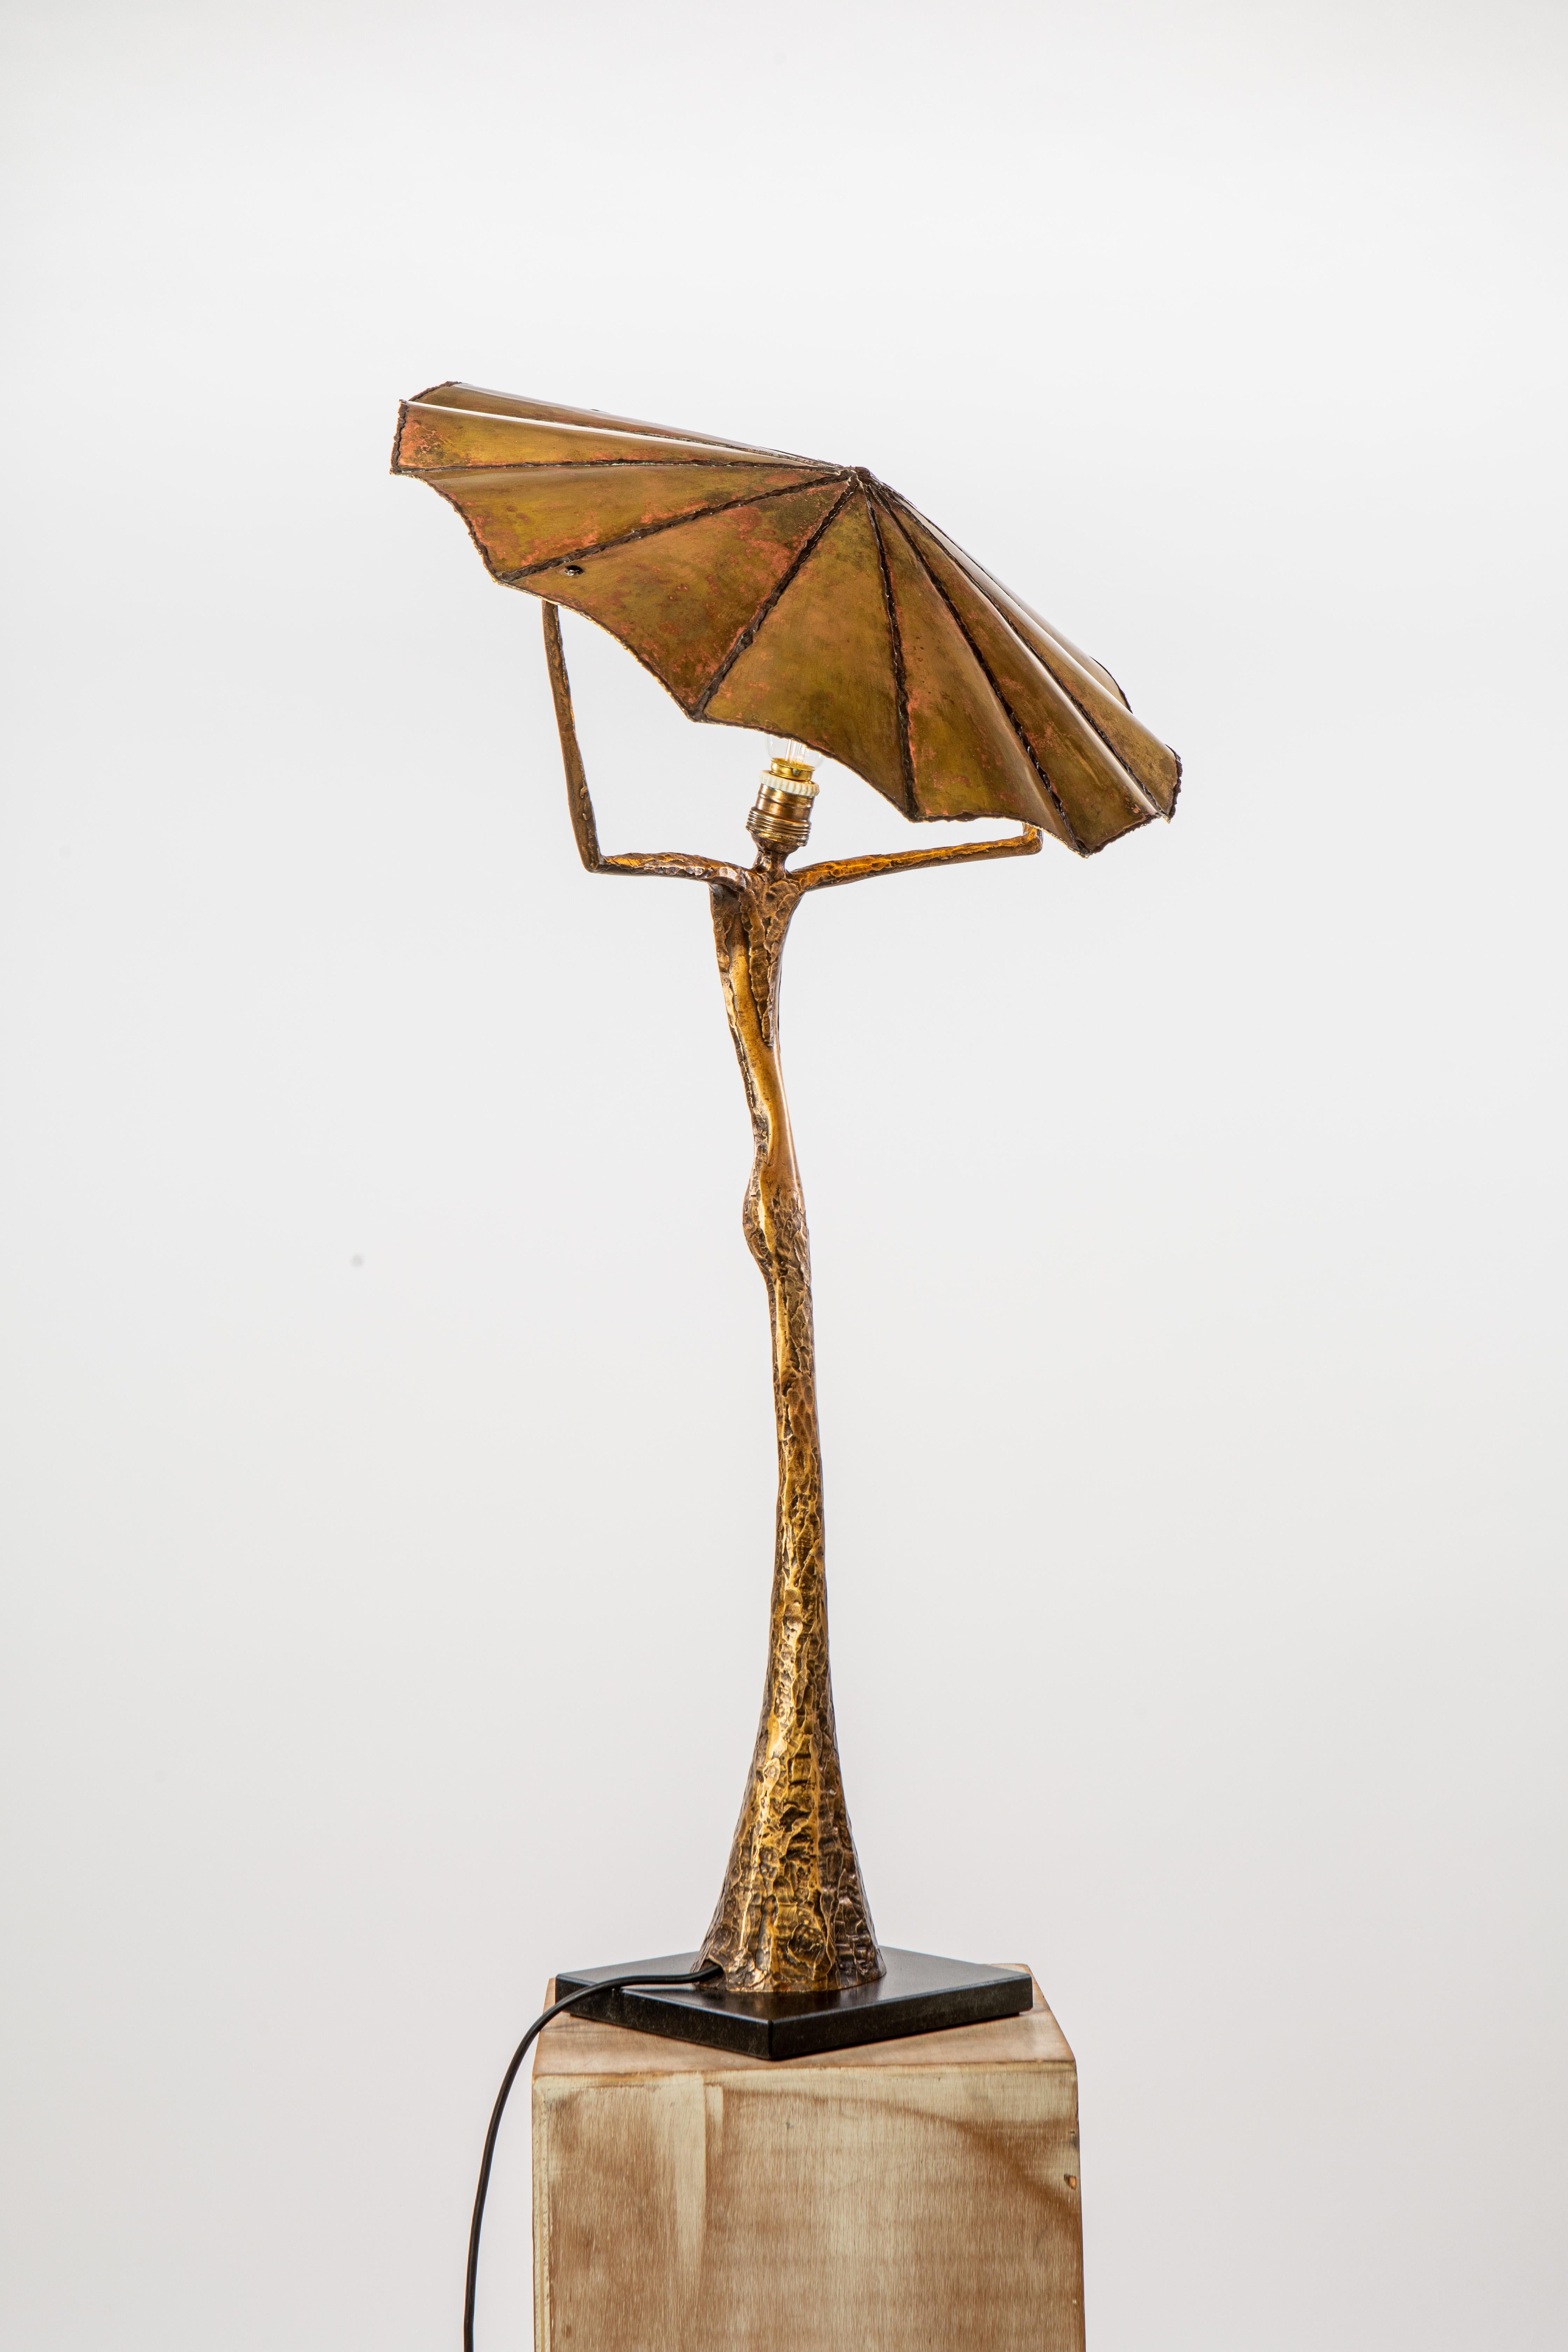 21st century sculptural table lamp V. MARS by Fantôme

Patinated bronze,
Stylised female character,
Gold plated brass reflector,
h. 37.8’’ x 18.5’’,
Numbered 4/8,
Signed, delivered with a certificate of authenticity.

This Sculptural Lamp pays